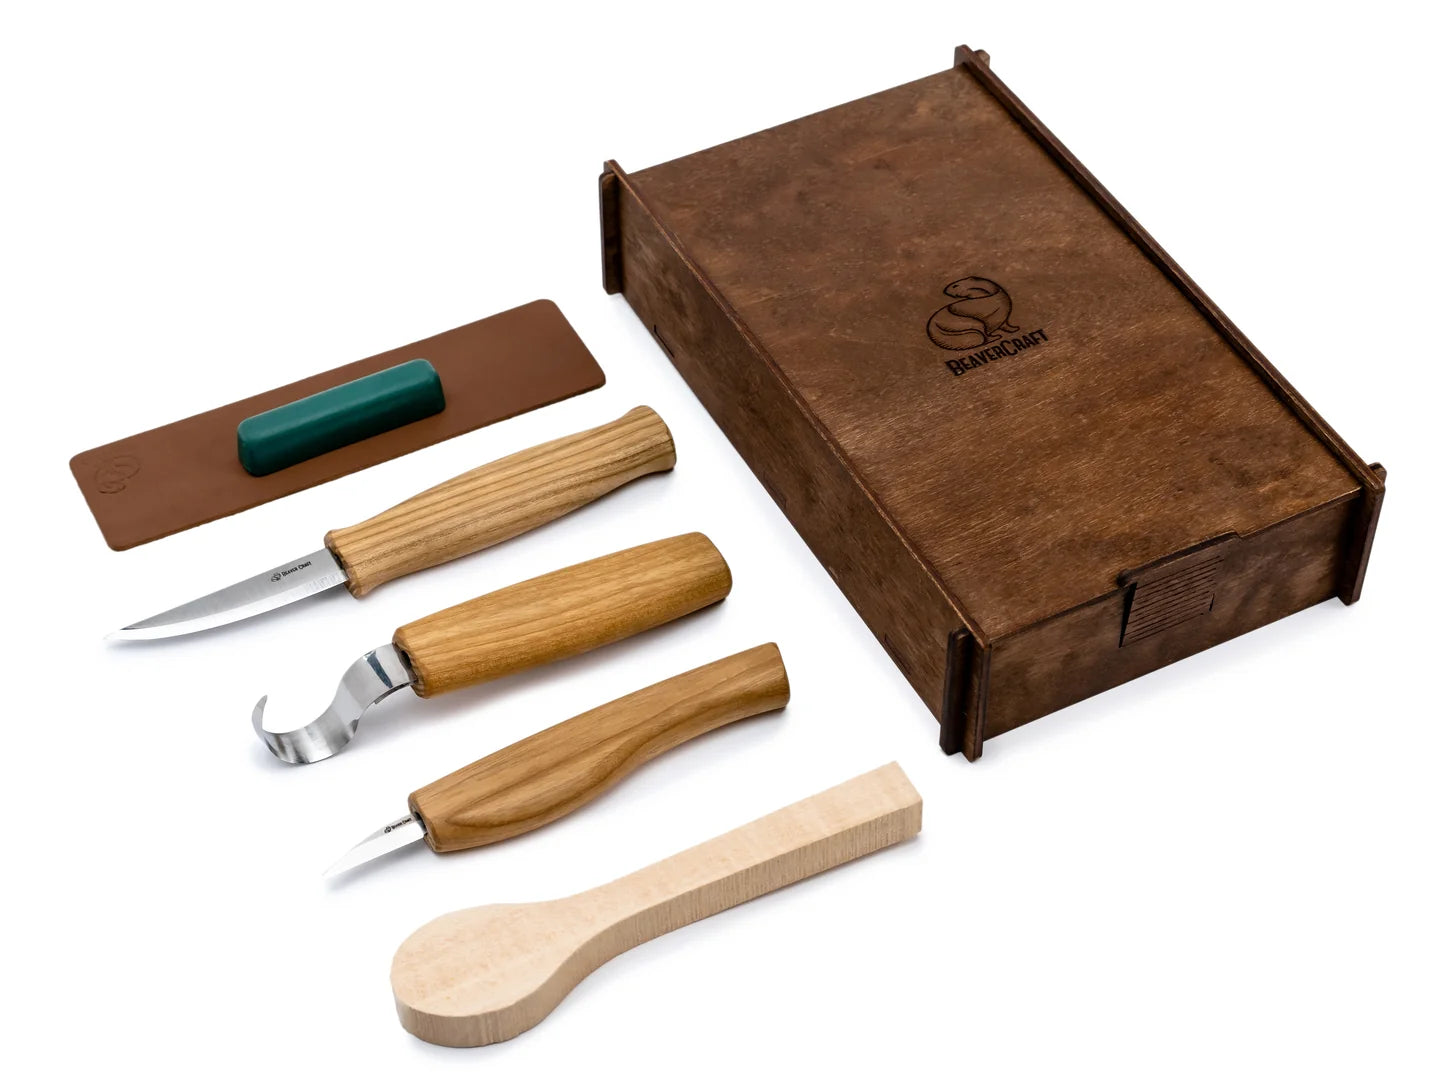 S13BOX - Premium Spoon Carving Set in A Box